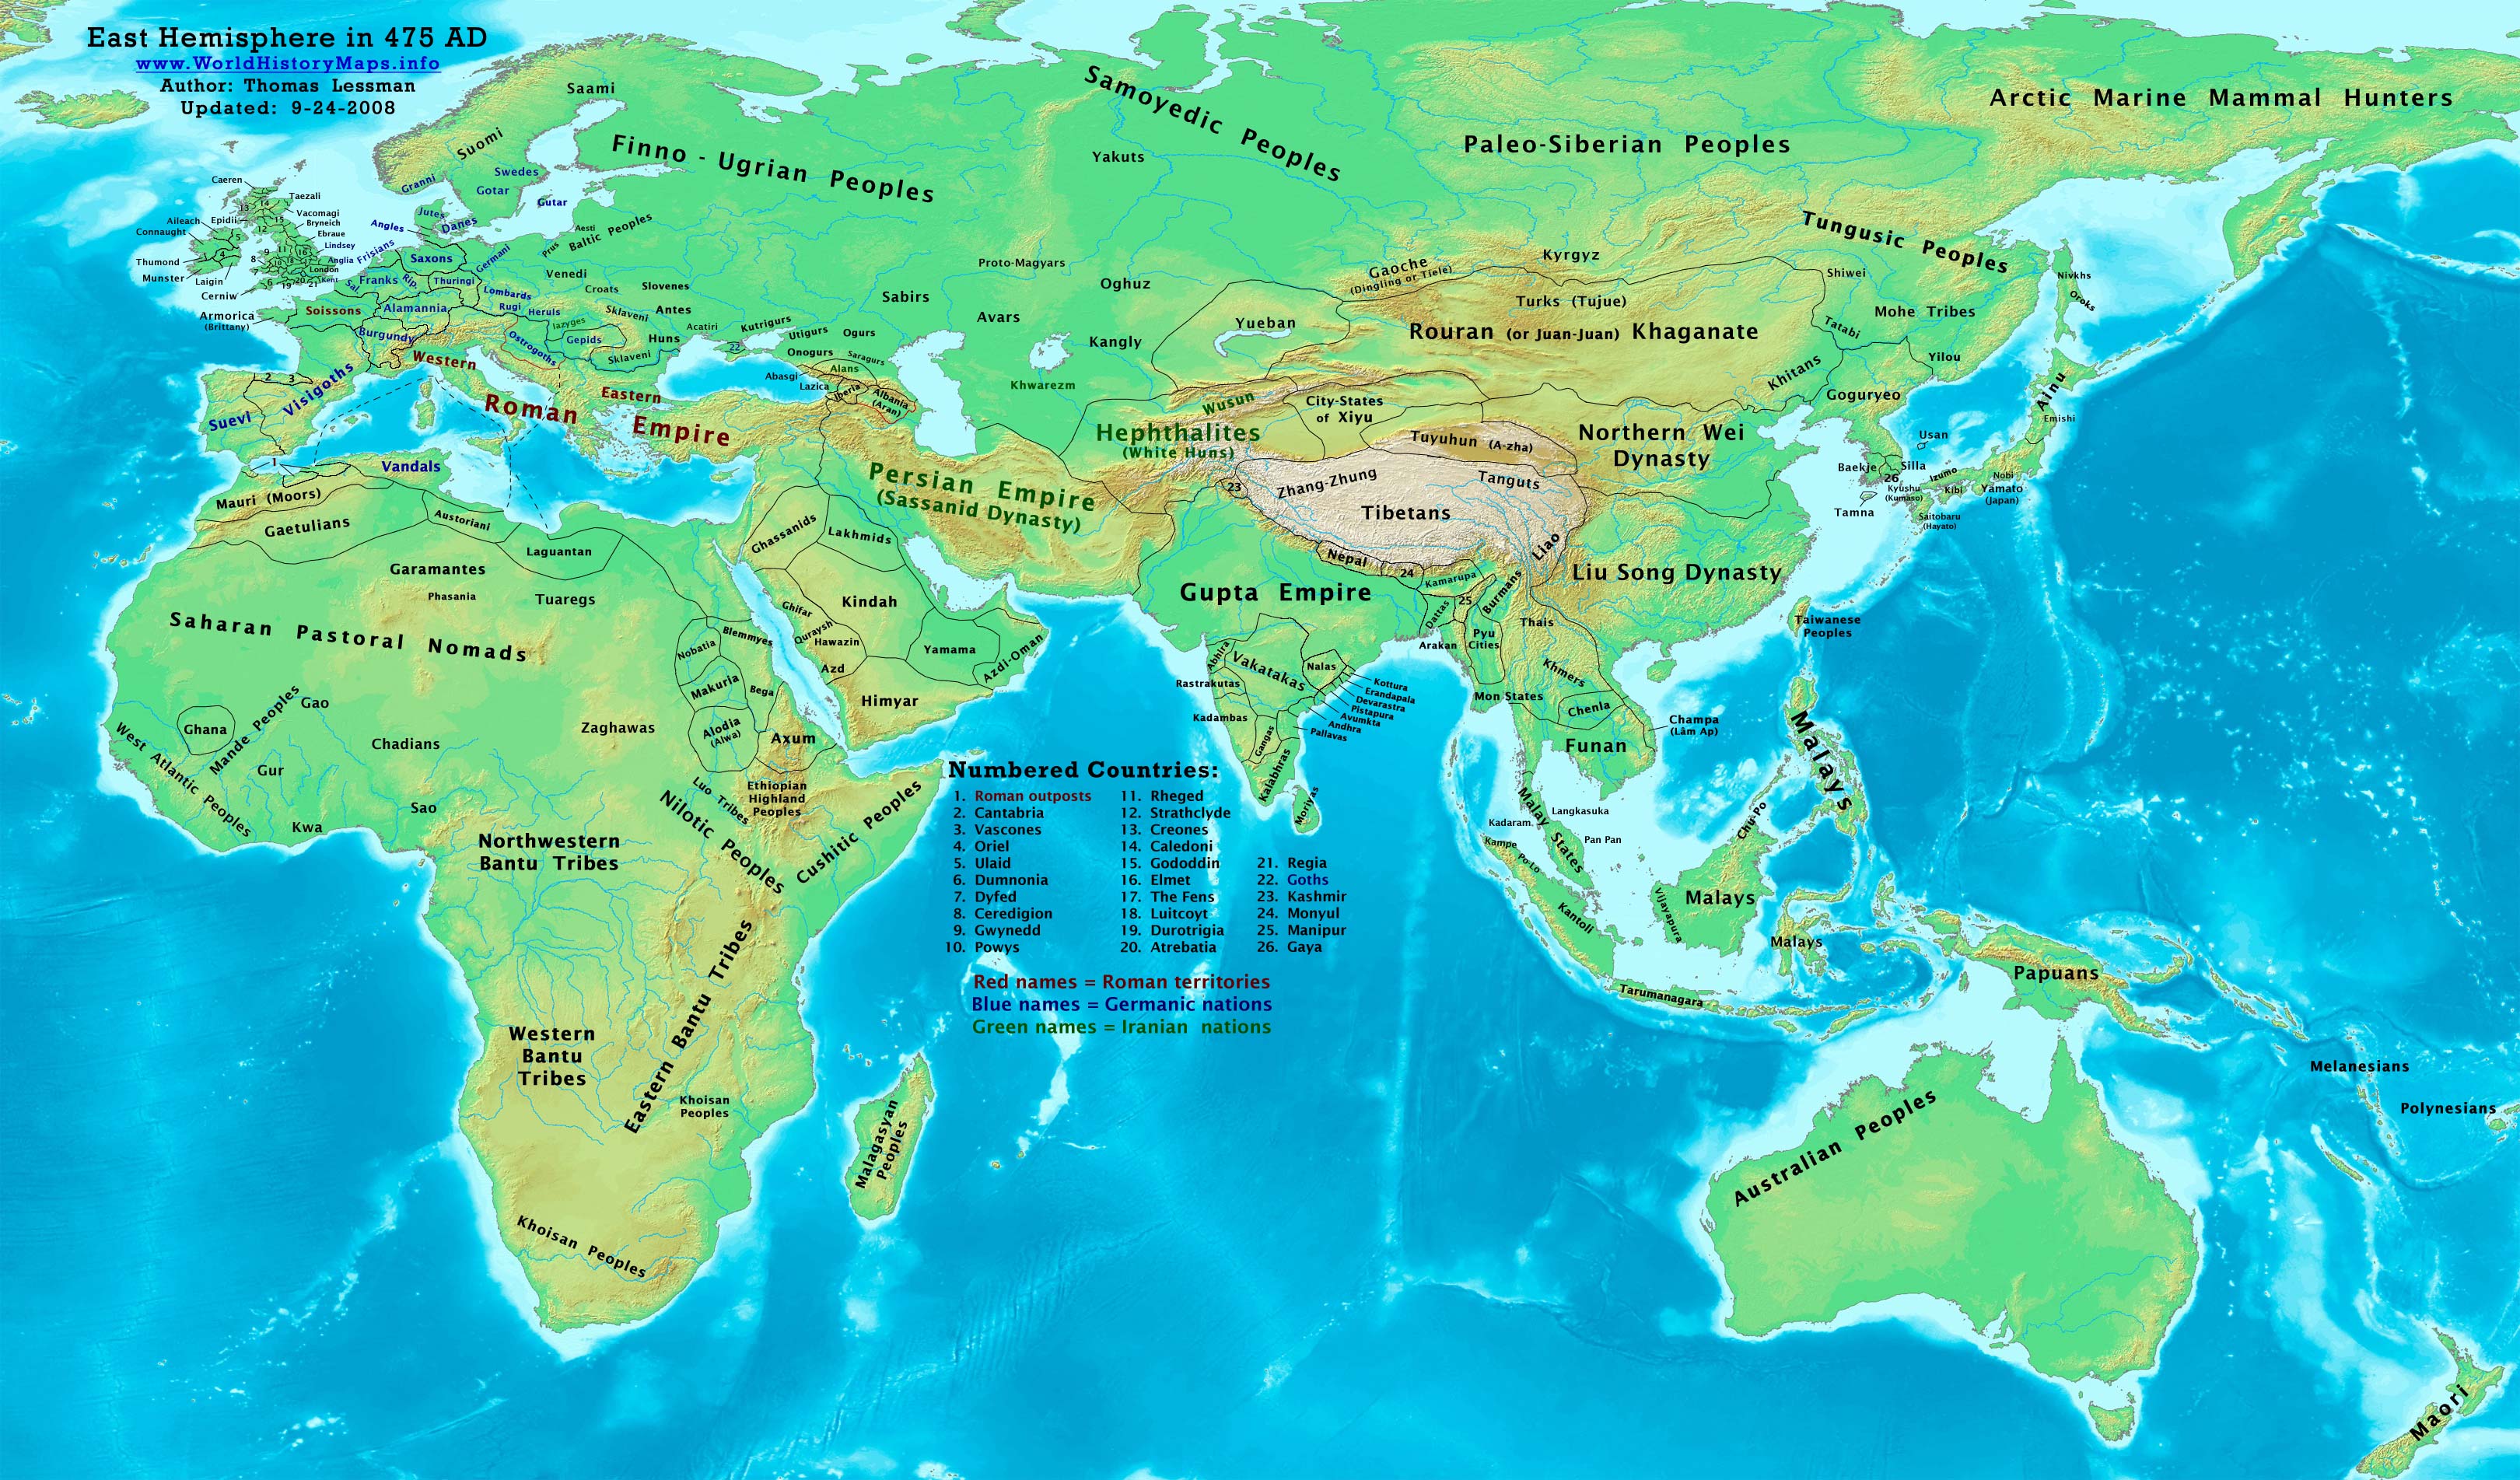 historical maps asia